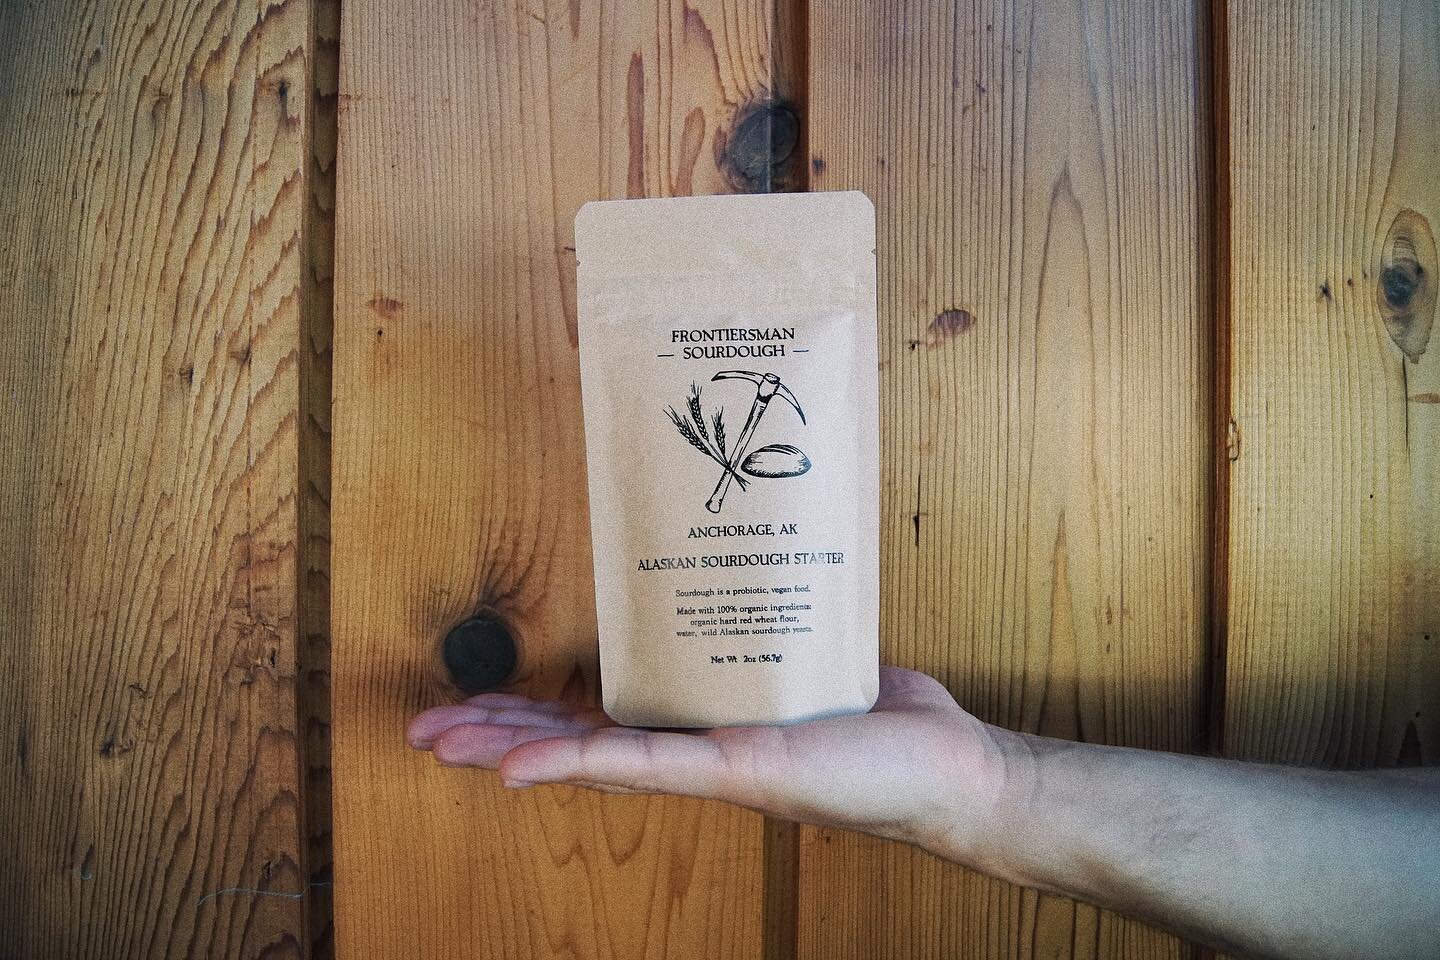 Something so simple can feed generations; literally and creatively.
.
Make memories!
.
Sustainably Made in Alaska with 100% organic ingredients
.
Packaged in biodegradable pouches
.
A portion of profits go toward protecting Alaska's wild natural envi